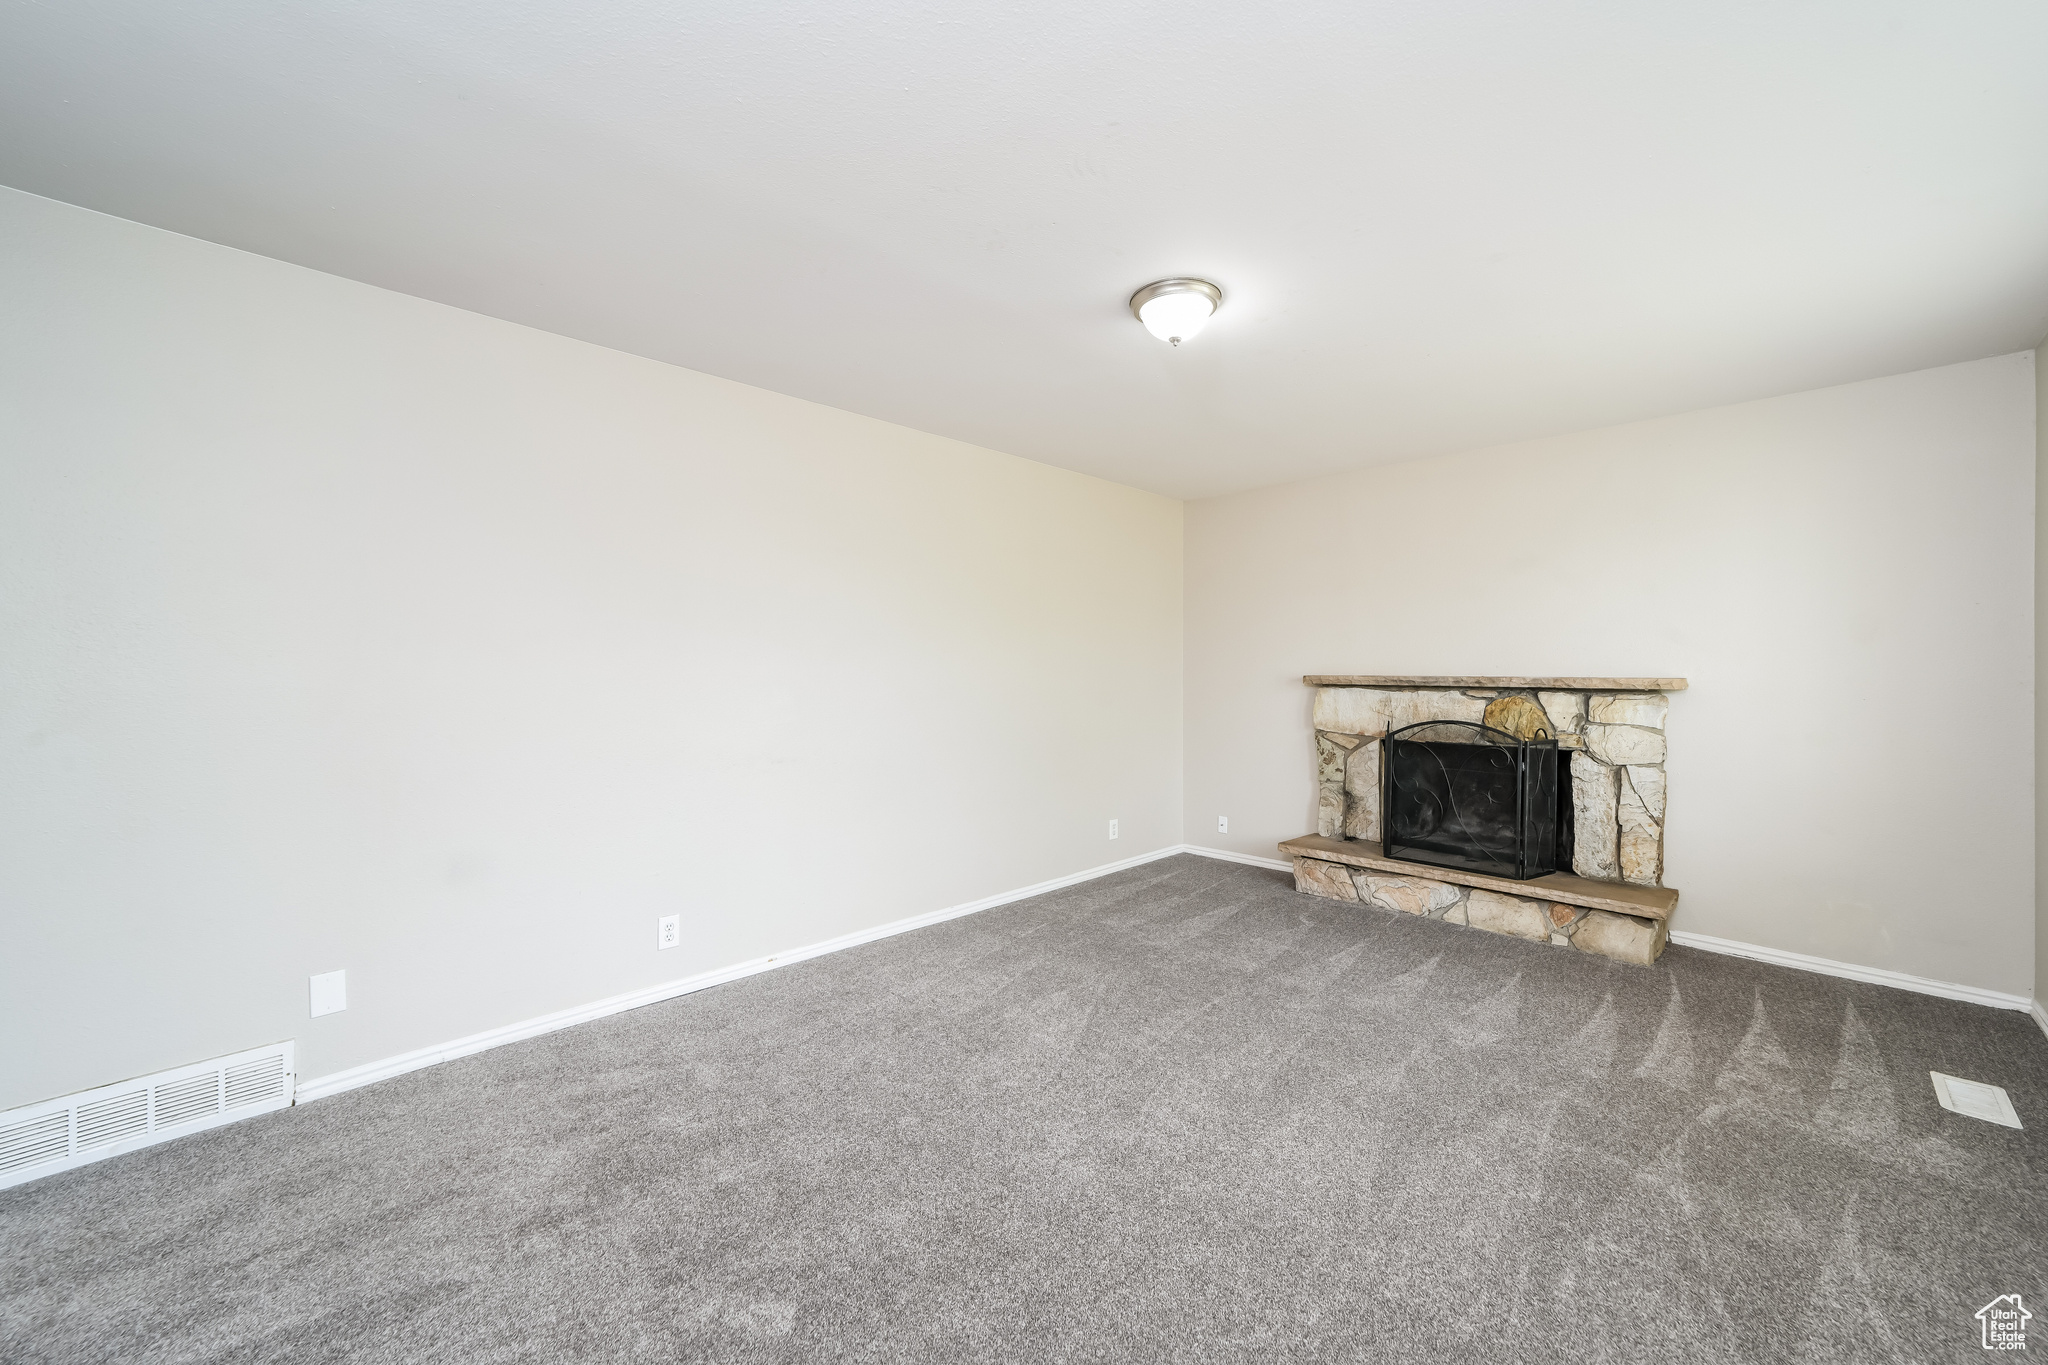 Unfurnished living room with a fireplace and carpet